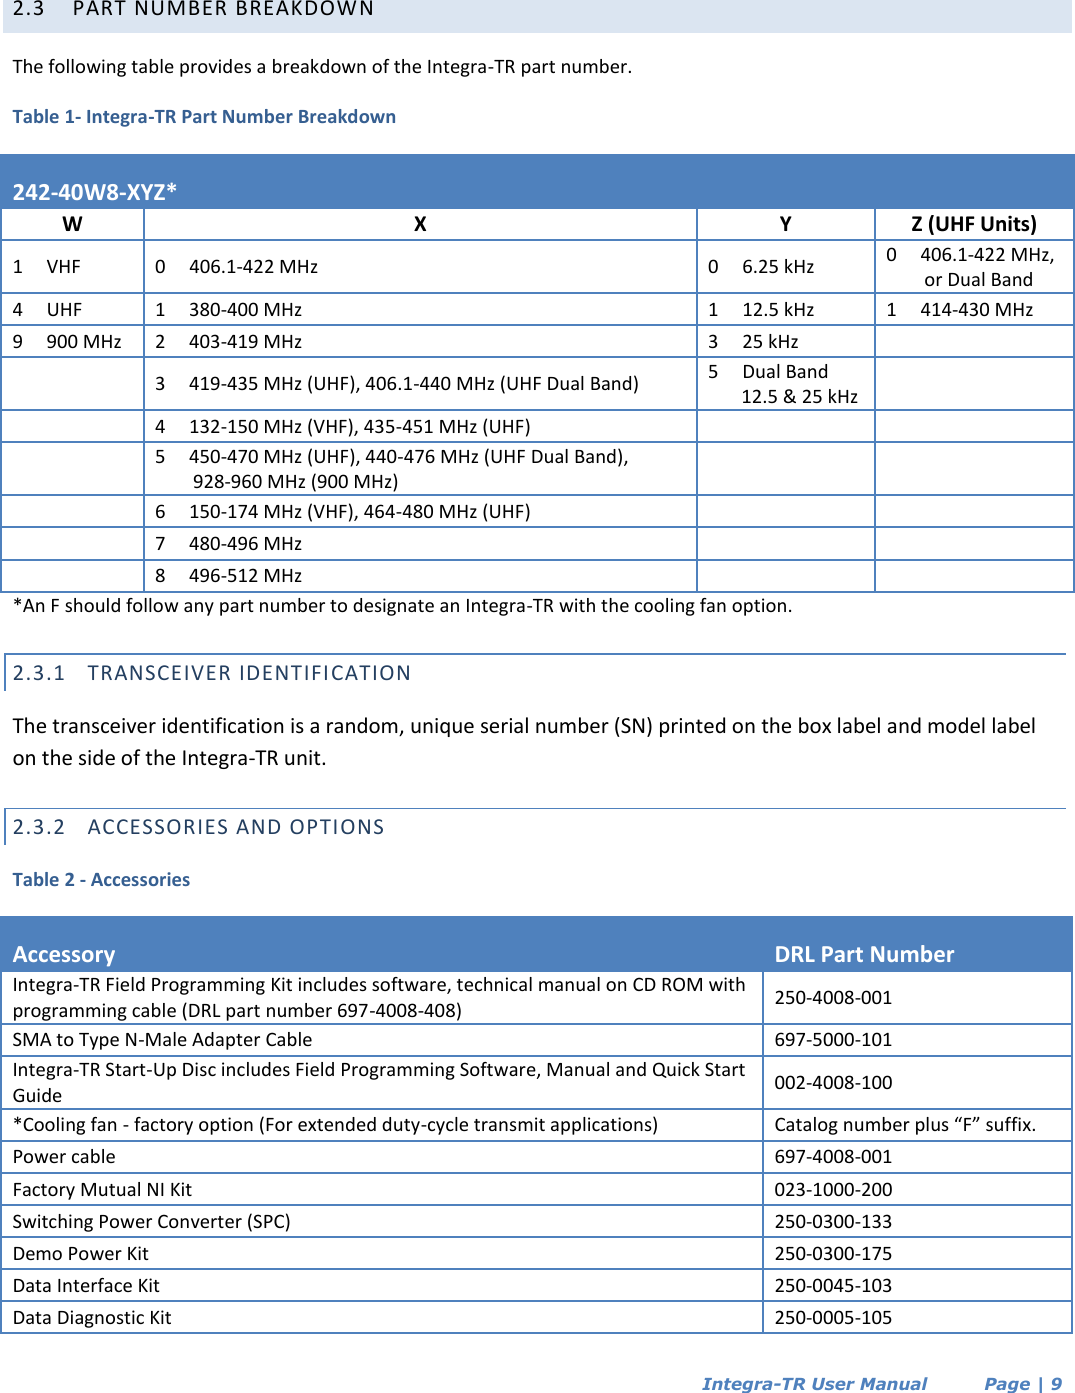  Integra-TR User Manual          Page | 9   2.3 PART NUMBER BREAKDOWN The following table provides a breakdown of the Integra-TR part number. Table 1- Integra-TR Part Number Breakdown 242-40W8-XYZ* W X Y Z (UHF Units) 1     VHF 0     406.1-422 MHz 0     6.25 kHz 0     406.1-422 MHz,          or Dual Band 4     UHF 1     380-400 MHz 1     12.5 kHz 1     414-430 MHz 9     900 MHz 2     403-419 MHz 3     25 kHz   3     419-435 MHz (UHF), 406.1-440 MHz (UHF Dual Band) 5     Dual Band        12.5 &amp; 25 kHz   4     132-150 MHz (VHF), 435-451 MHz (UHF)    5     450-470 MHz (UHF), 440-476 MHz (UHF Dual Band),           928-960 MHz (900 MHz)    6     150-174 MHz (VHF), 464-480 MHz (UHF)    7     480-496 MHz    8     496-512 MHz   *An F should follow any part number to designate an Integra-TR with the cooling fan option. 2.3.1 TRANSCEIVER IDENTIFICATION The transceiver identification is a random, unique serial number (SN) printed on the box label and model label on the side of the Integra-TR unit.  2.3.2 ACCESSORIES AND OPTIONS Table 2 - Accessories Accessory DRL Part Number Integra-TR Field Programming Kit includes software, technical manual on CD ROM with programming cable (DRL part number 697-4008-408)  250-4008-001  SMA to Type N-Male Adapter Cable  697-5000-101  Integra-TR Start-Up Disc includes Field Programming Software, Manual and Quick Start Guide  002-4008-100  *Cooling fan - factory option (For extended duty-cycle transmit applications)  Catalog number plus “F” suffix.  Power cable  697-4008-001  Factory Mutual NI Kit  023-1000-200  Switching Power Converter (SPC)  250-0300-133  Demo Power Kit  250-0300-175  Data Interface Kit  250-0045-103  Data Diagnostic Kit  250-0005-105  